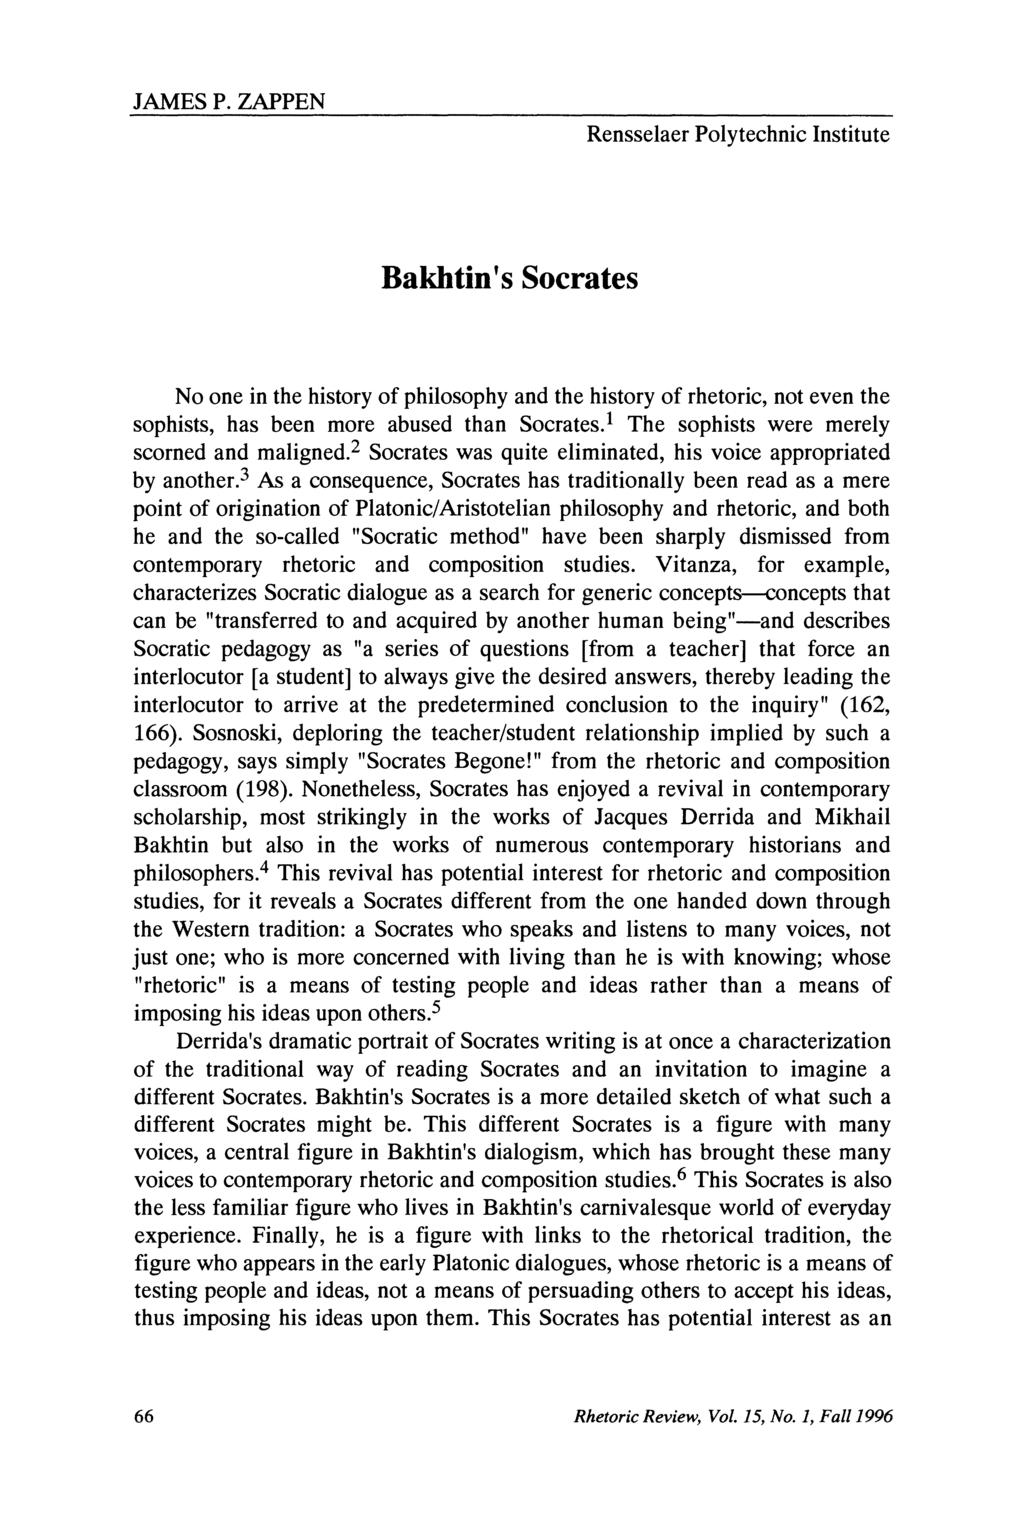 JAMES P. ZAPPEN Rensselaer Polytechnic Institute Bakhtin's Socrates No one in the history of philosophy and the history of rhetoric, not even the sophists, has been more abused than Socrates.